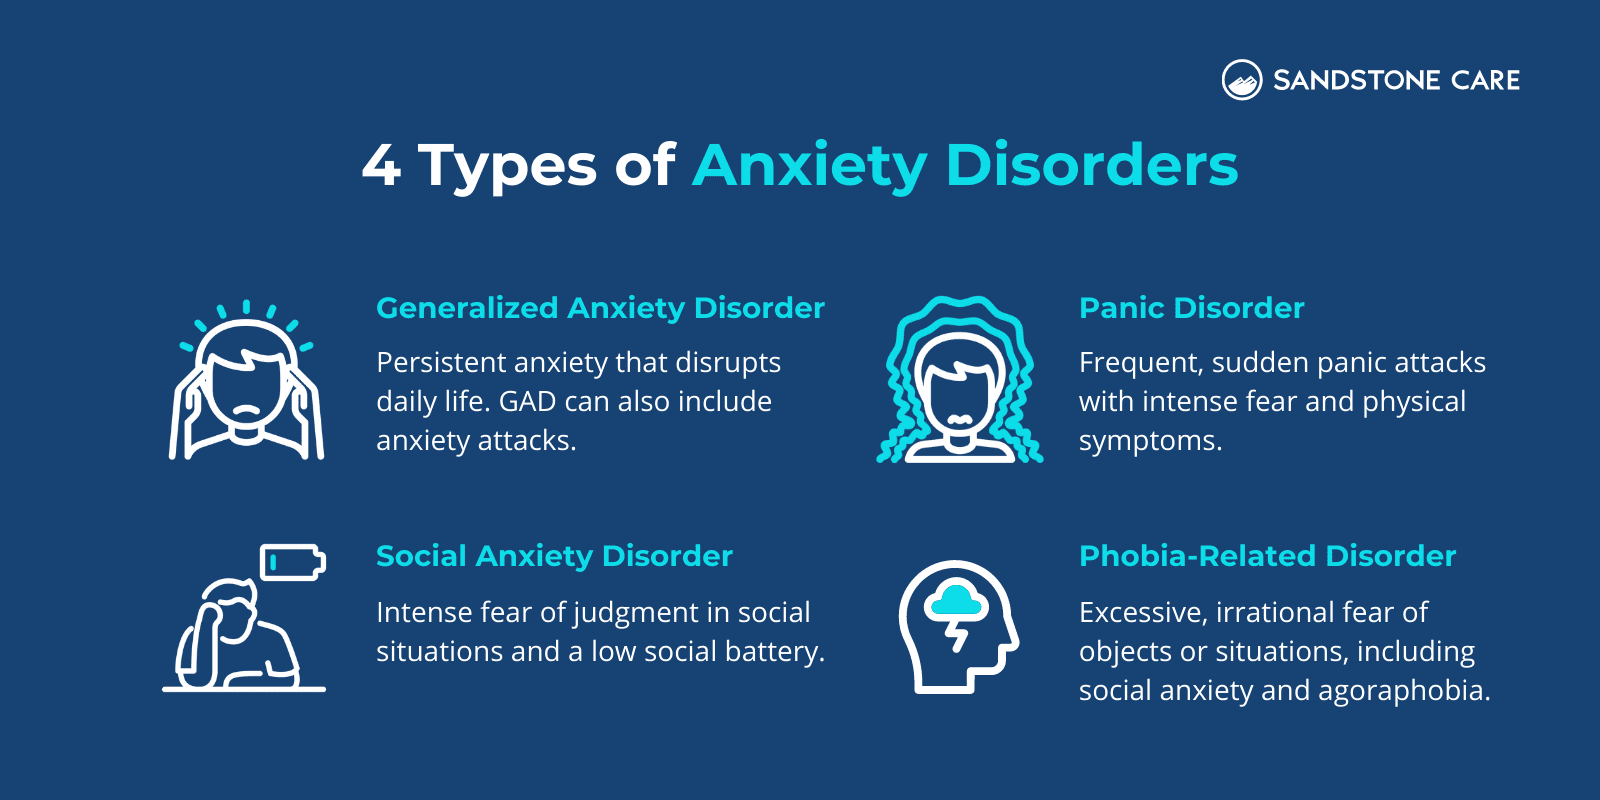 4 Types of Anxiety Disorders